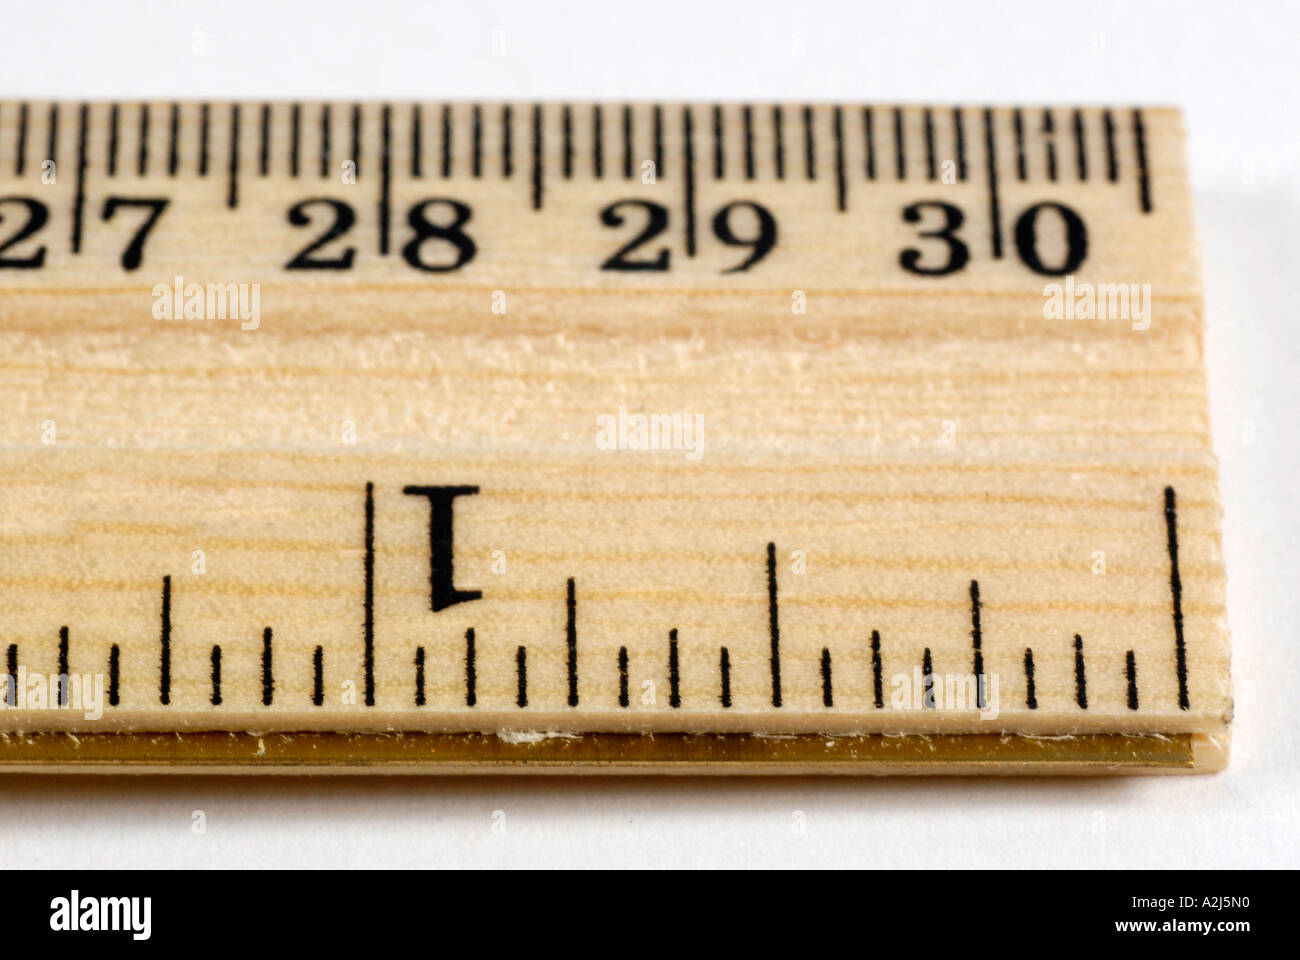 Wood ruler is a measuring device in inches and centimeters Stock Photo